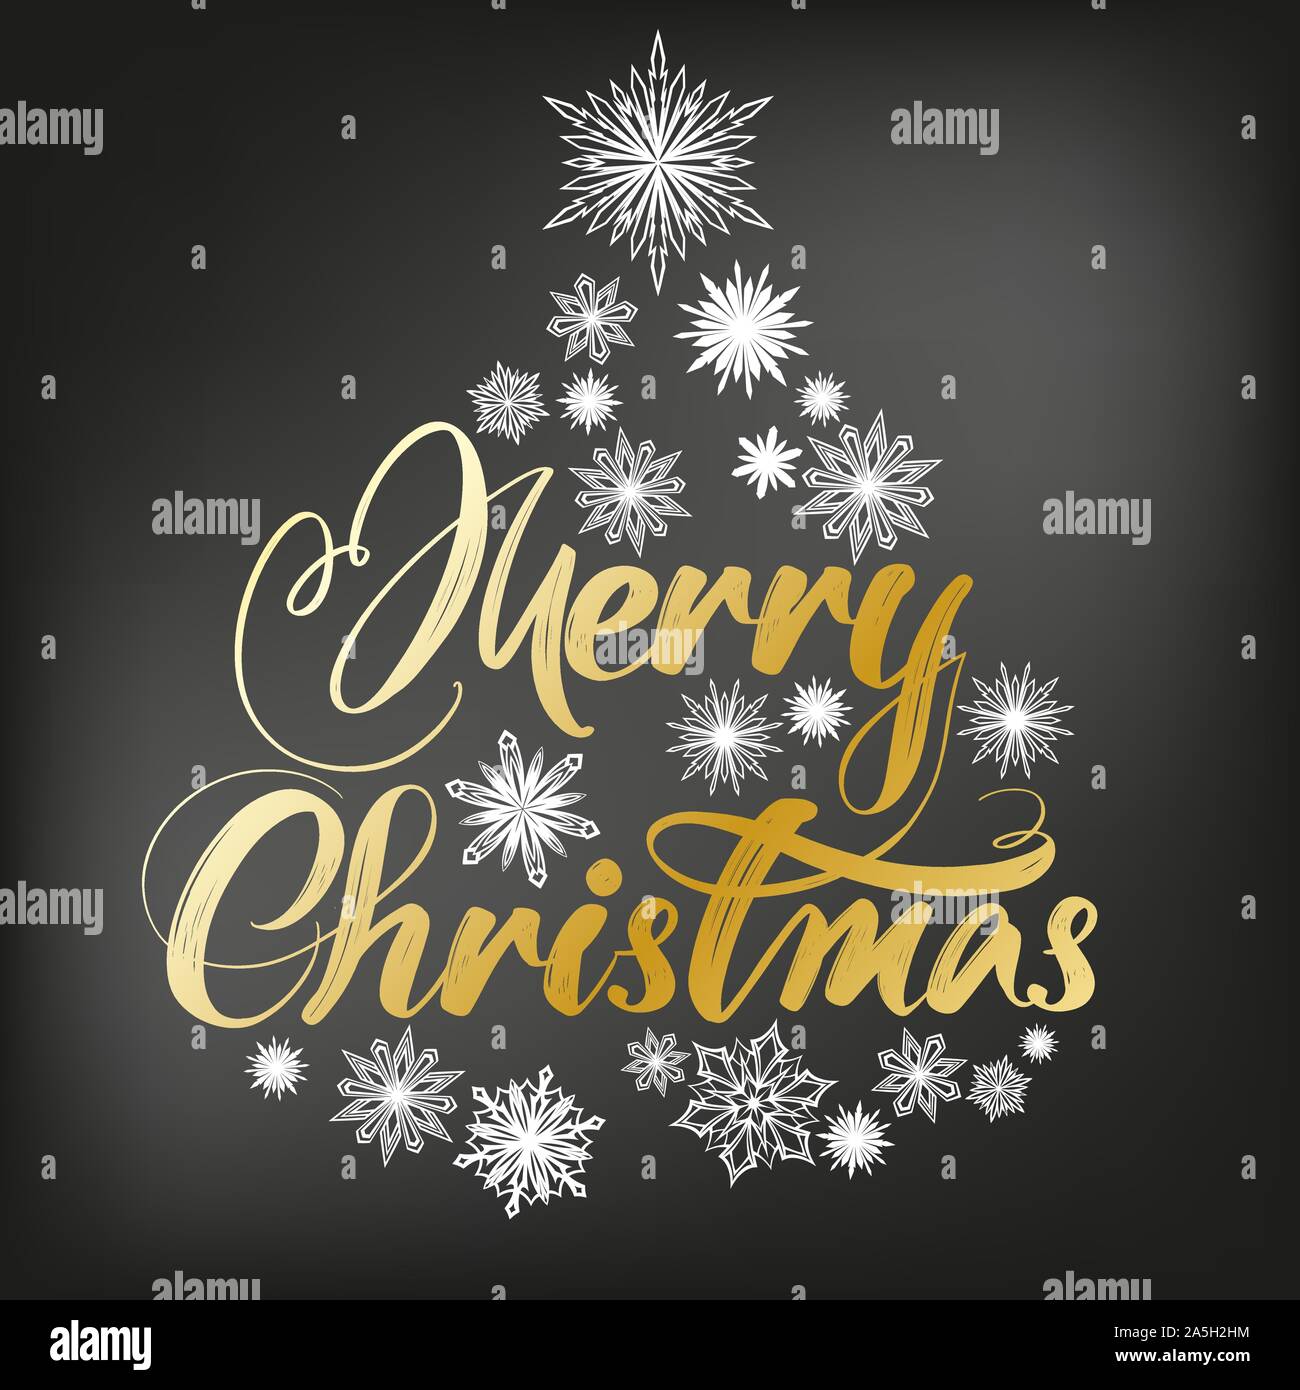 Merry Christmas Calligraphy lettering text and decorative snowflakes, symbol of Christianity hand drawn vector illustration sketch on a black Board. Stock Vector